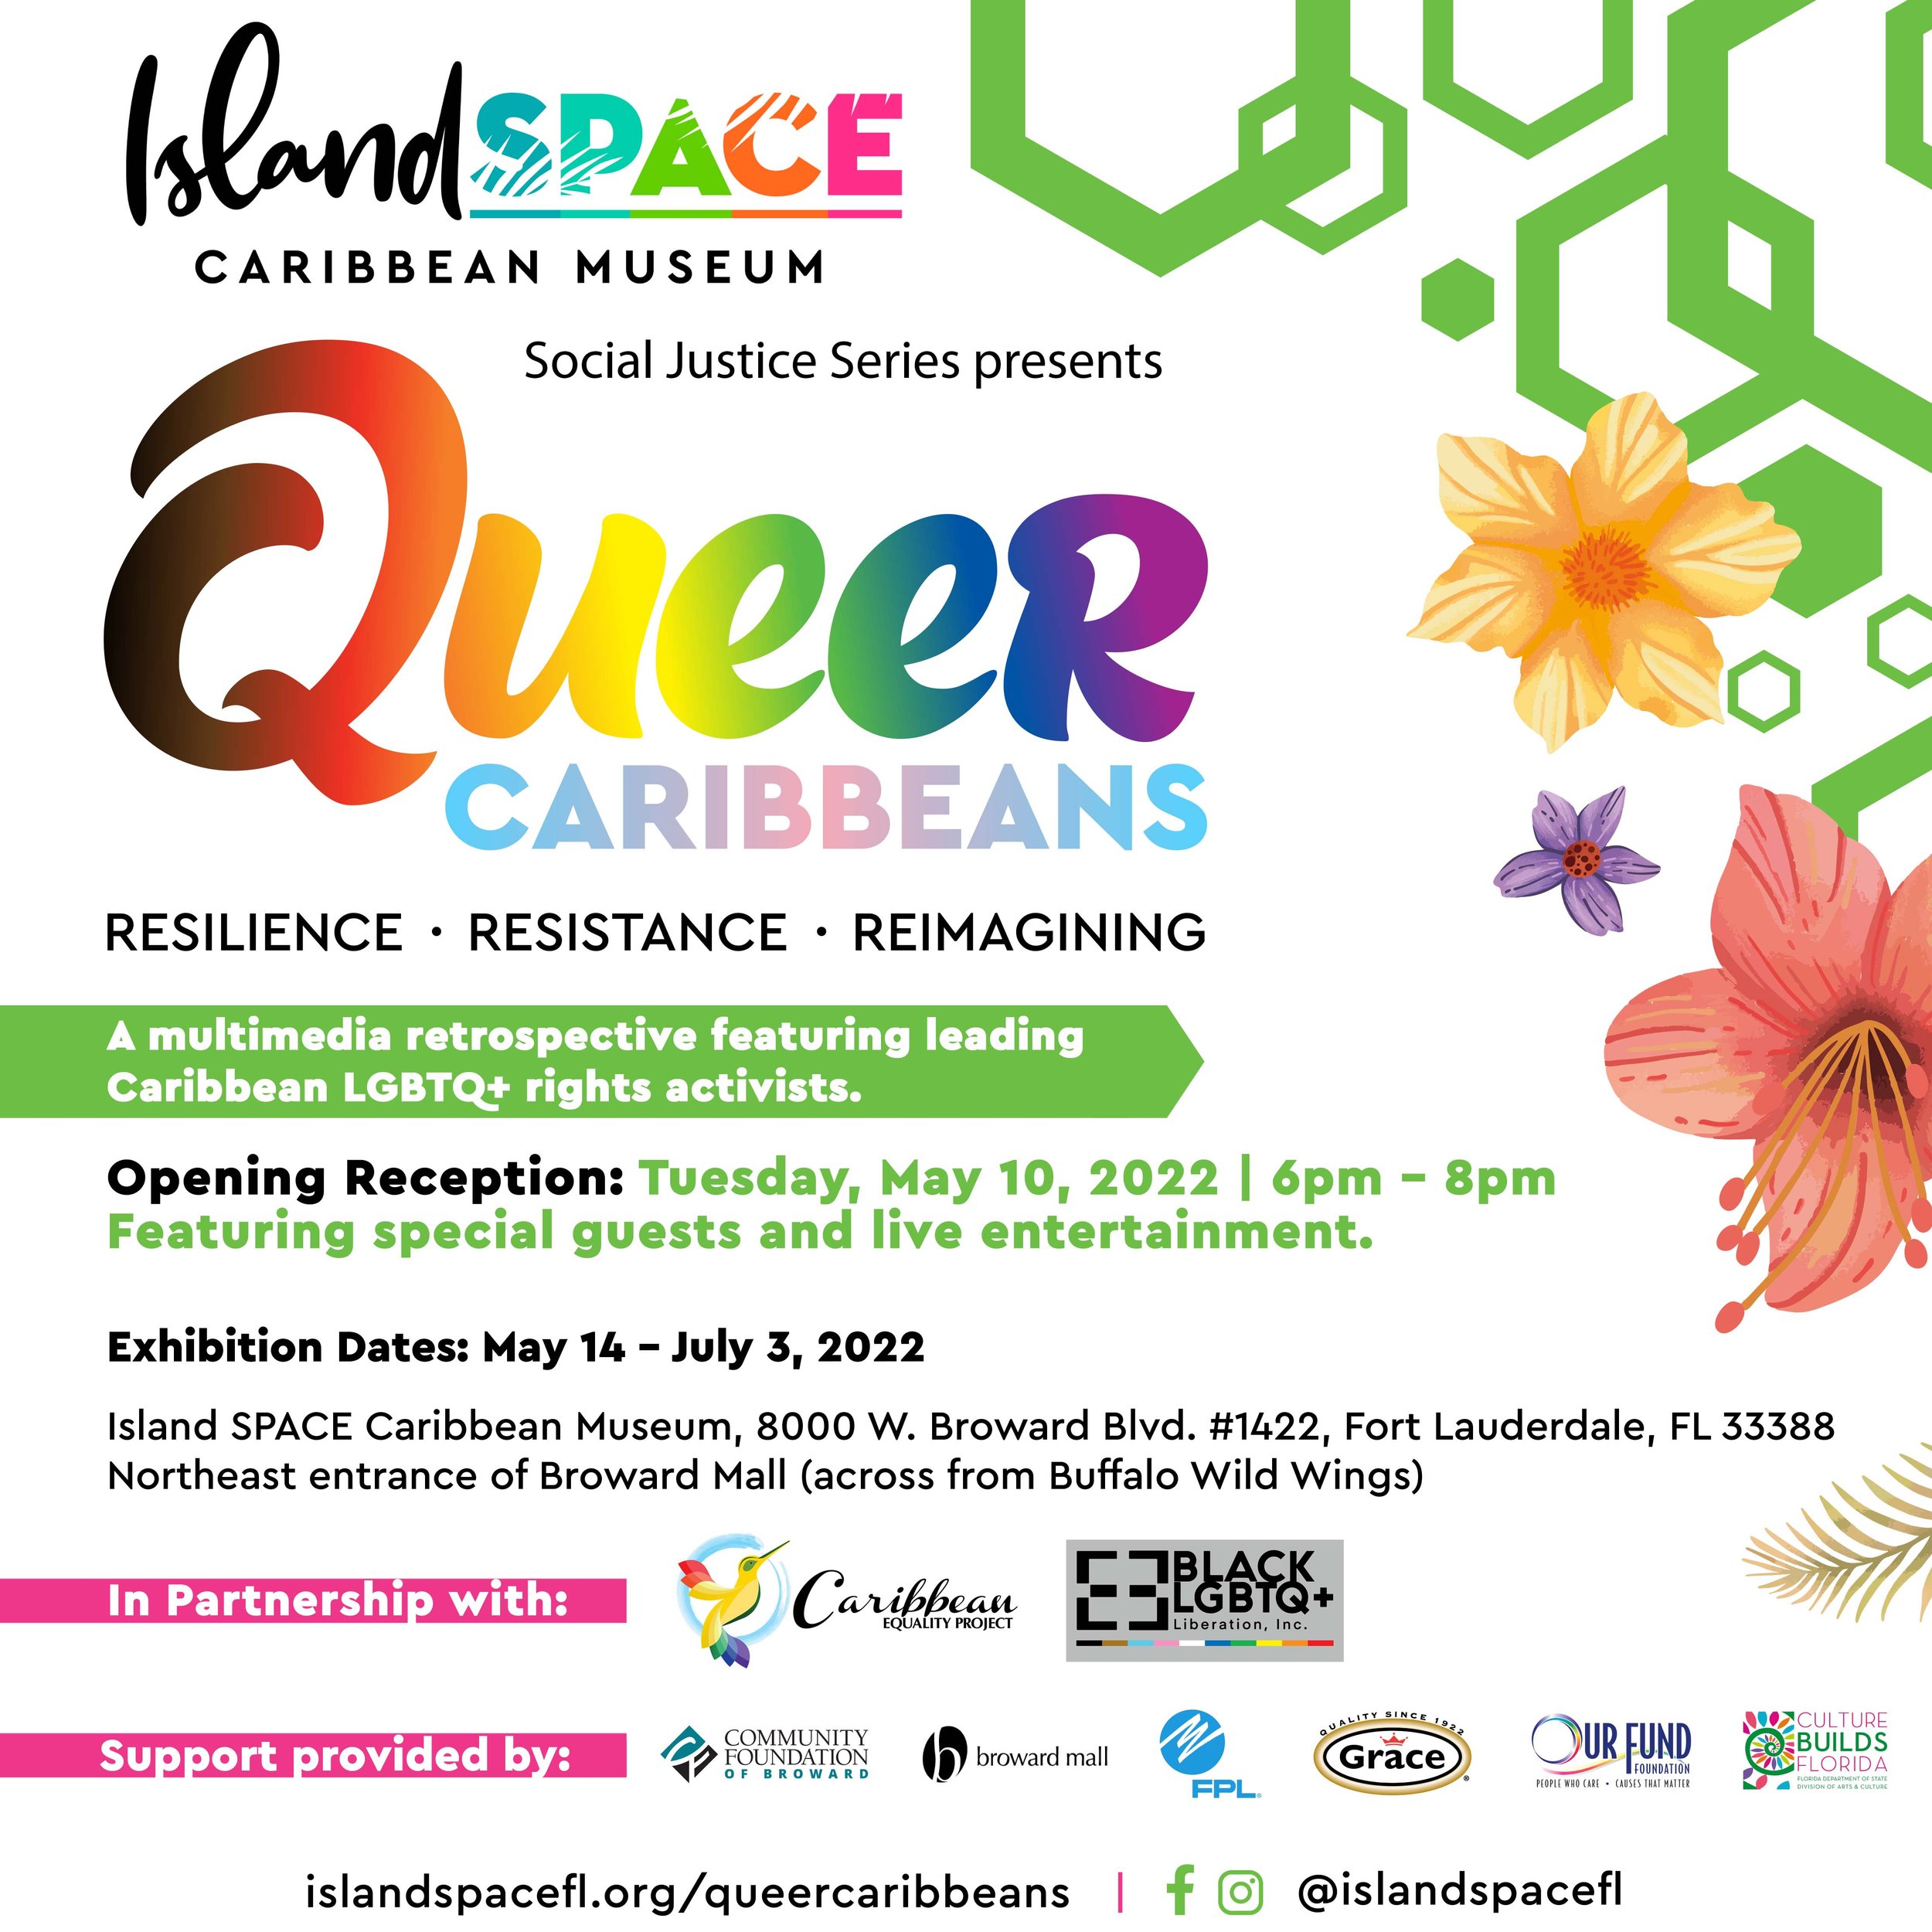 Queers Caribbeans: Resilience. Resistance. Reimaging.